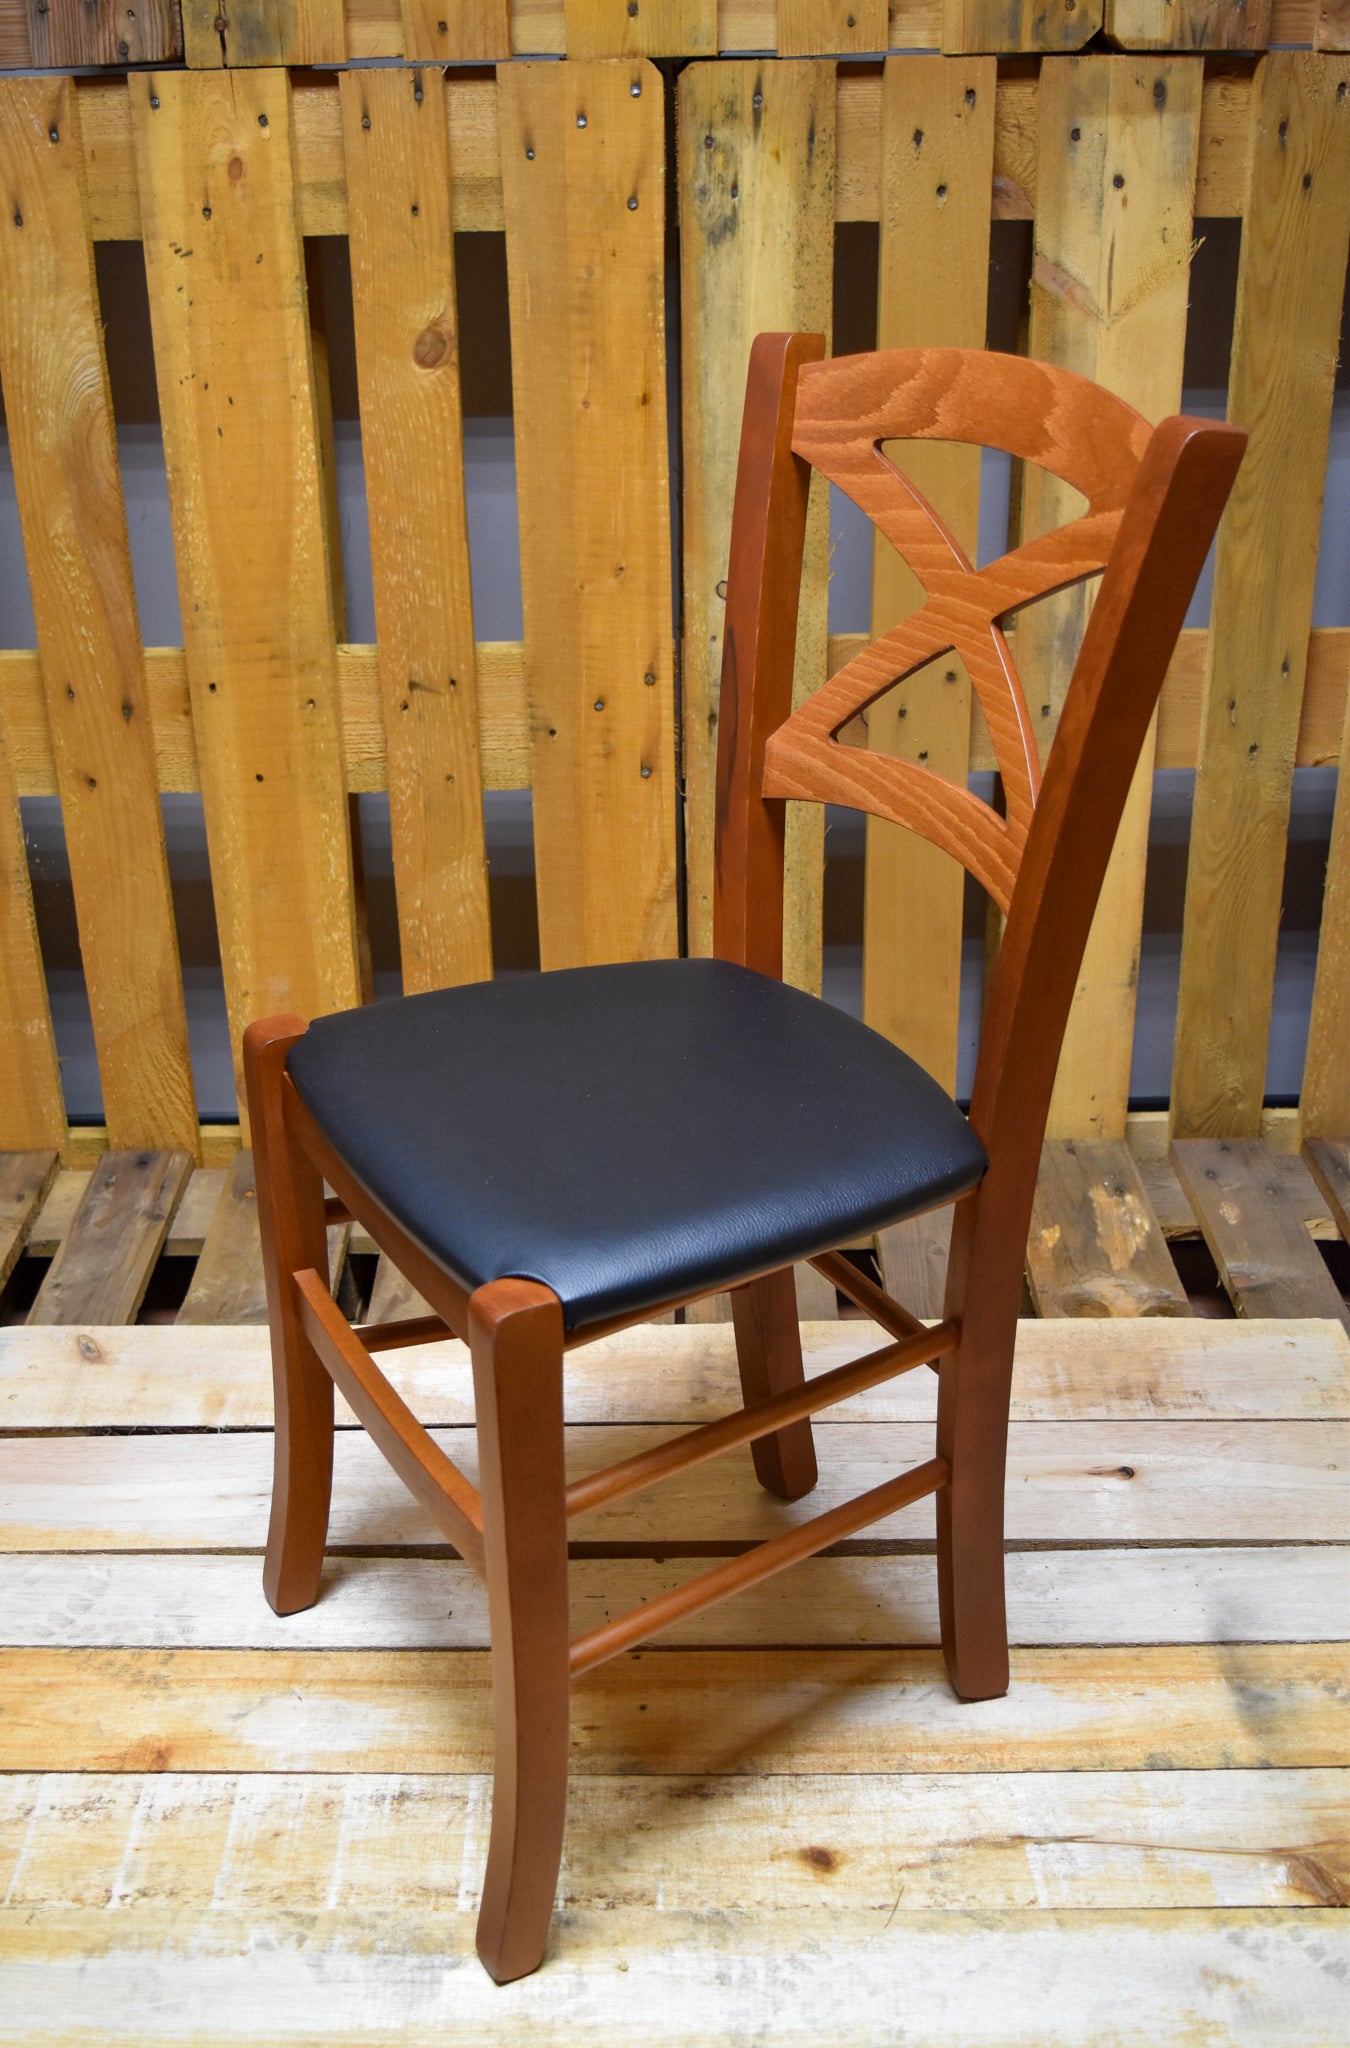 Stock chairs model 33 walnut color with black padded seat